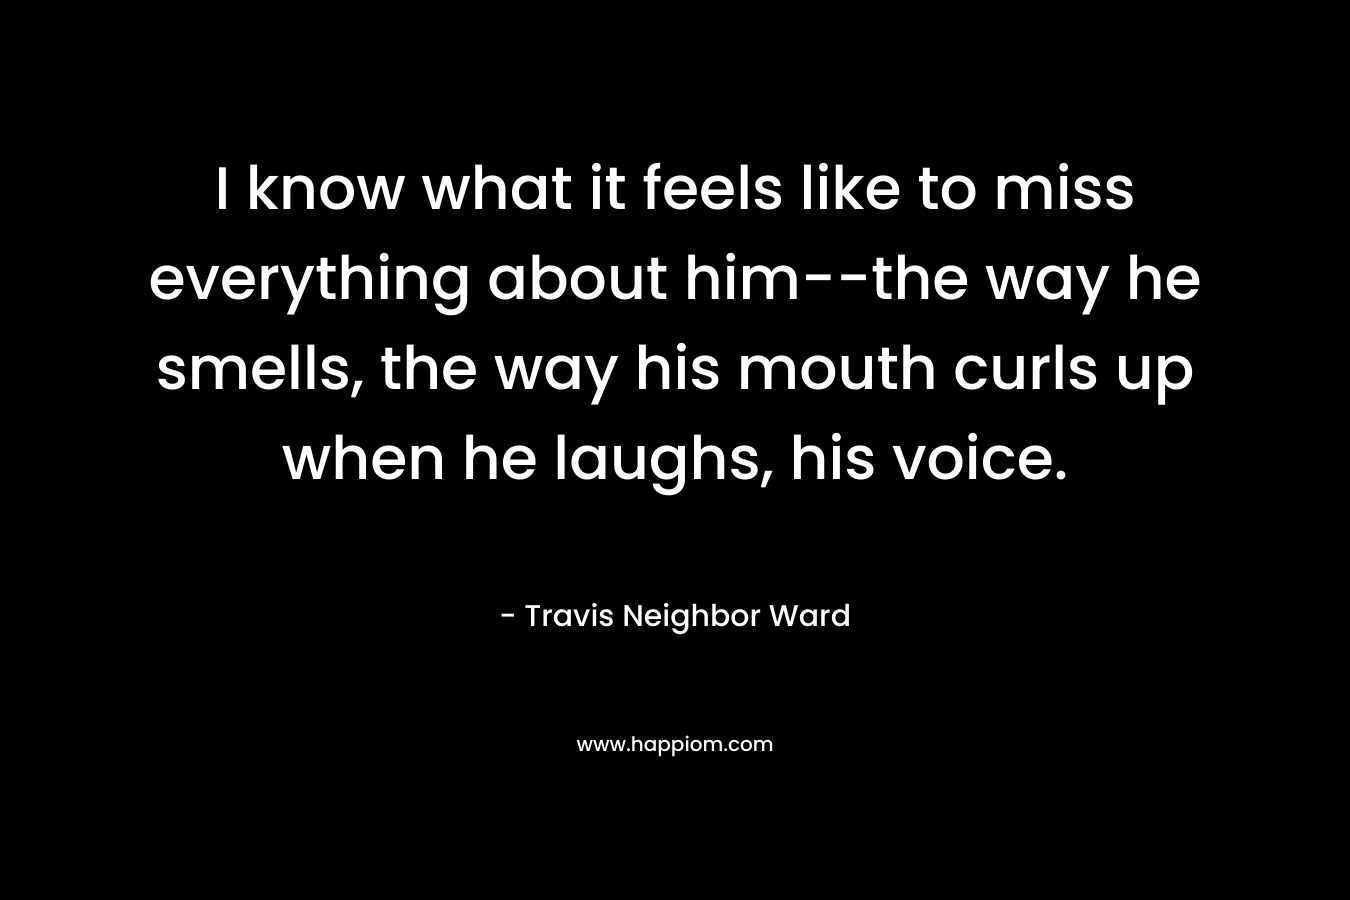 I know what it feels like to miss everything about him–the way he smells, the way his mouth curls up when he laughs, his voice. – Travis Neighbor Ward